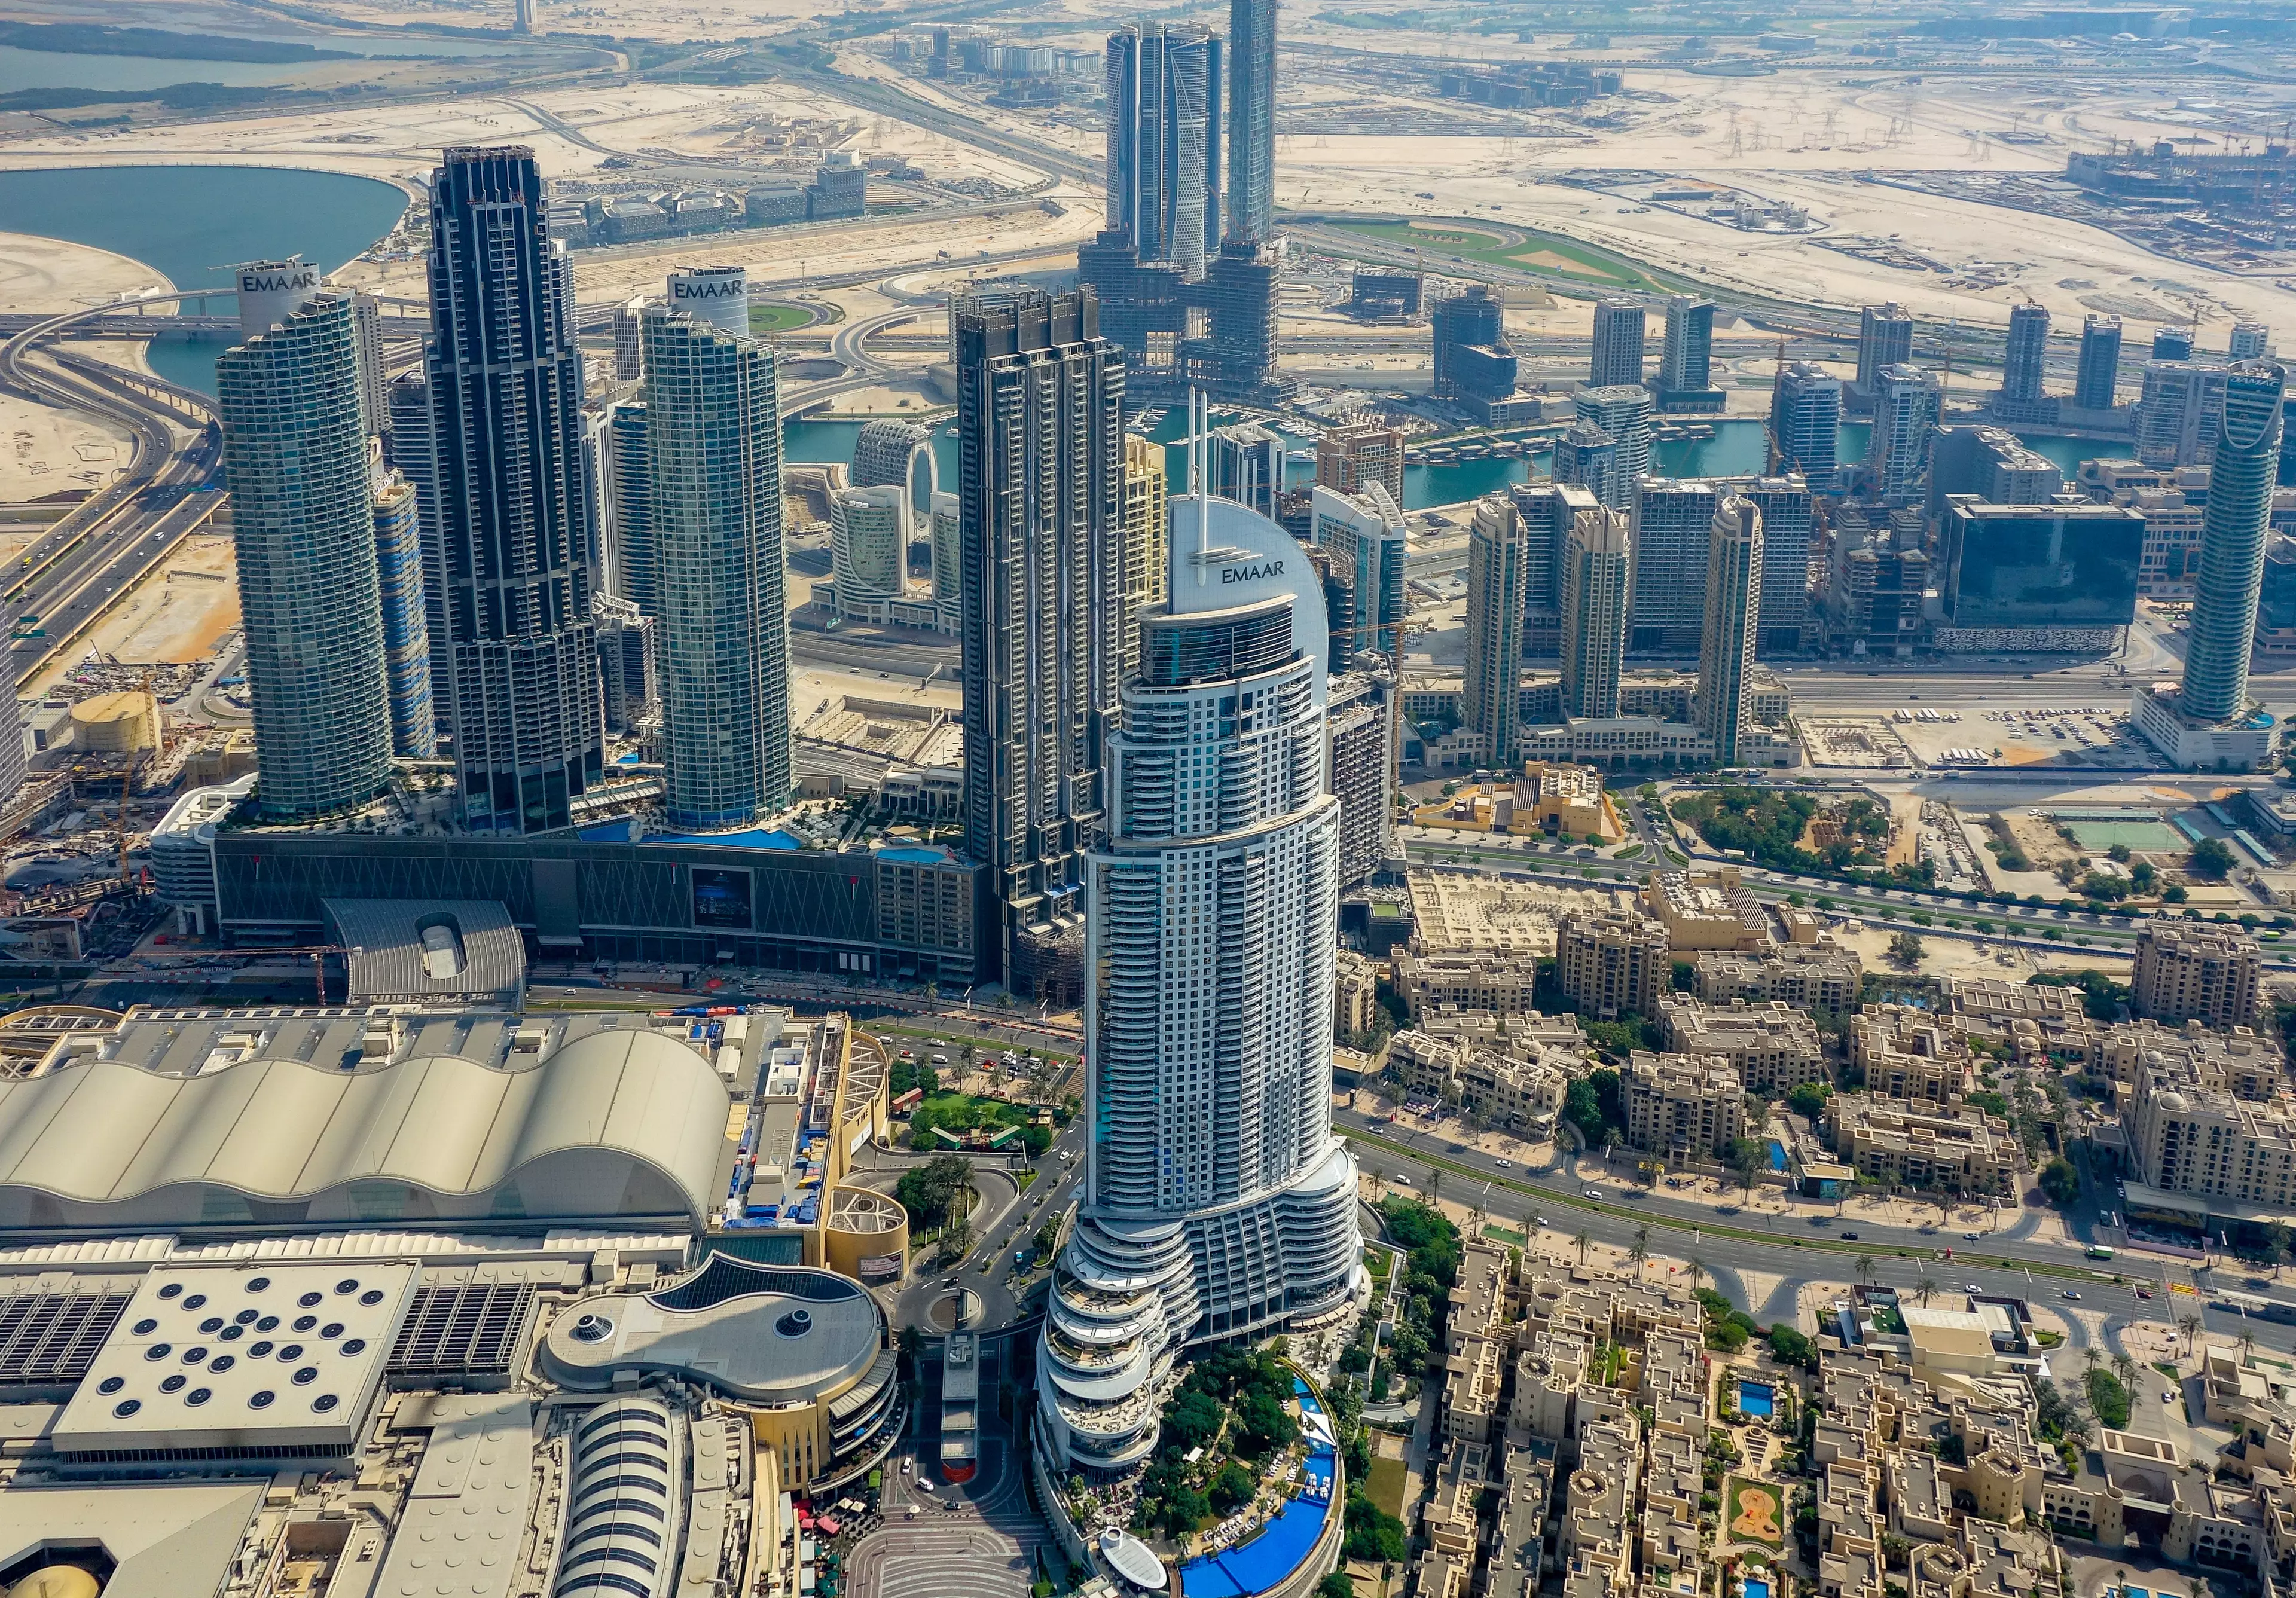 Dubai is the largest city in the United Arab Emirates.